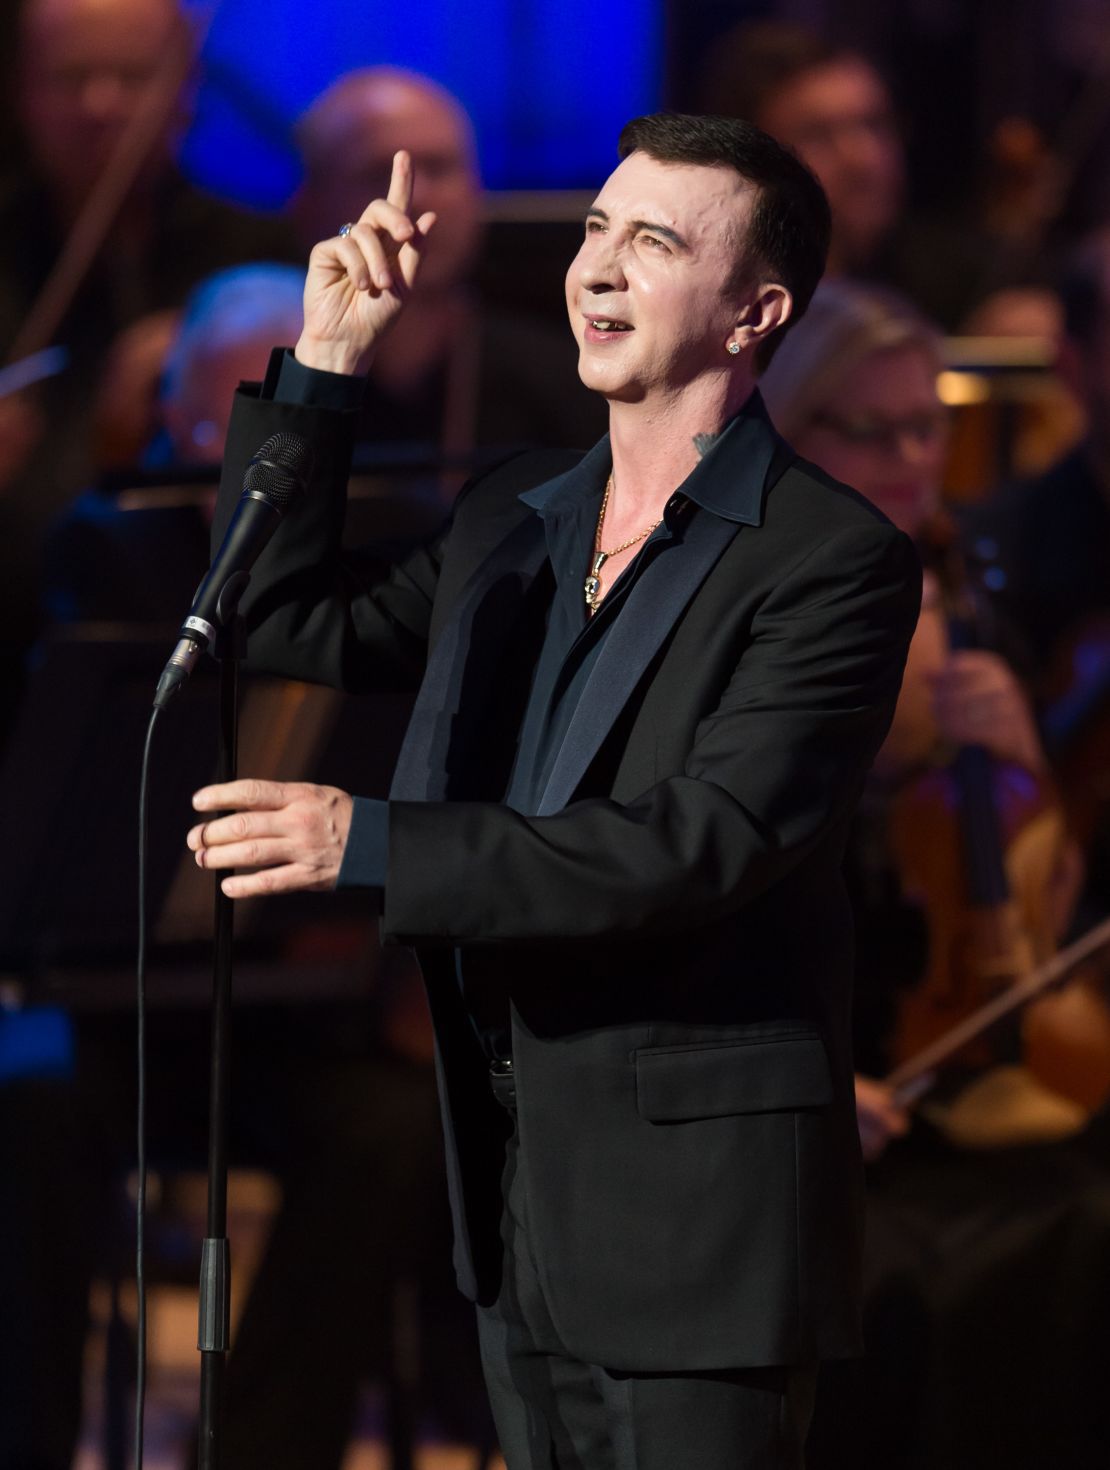 Marc Almond performs at the Royal Festival Hall in London in 2013. 